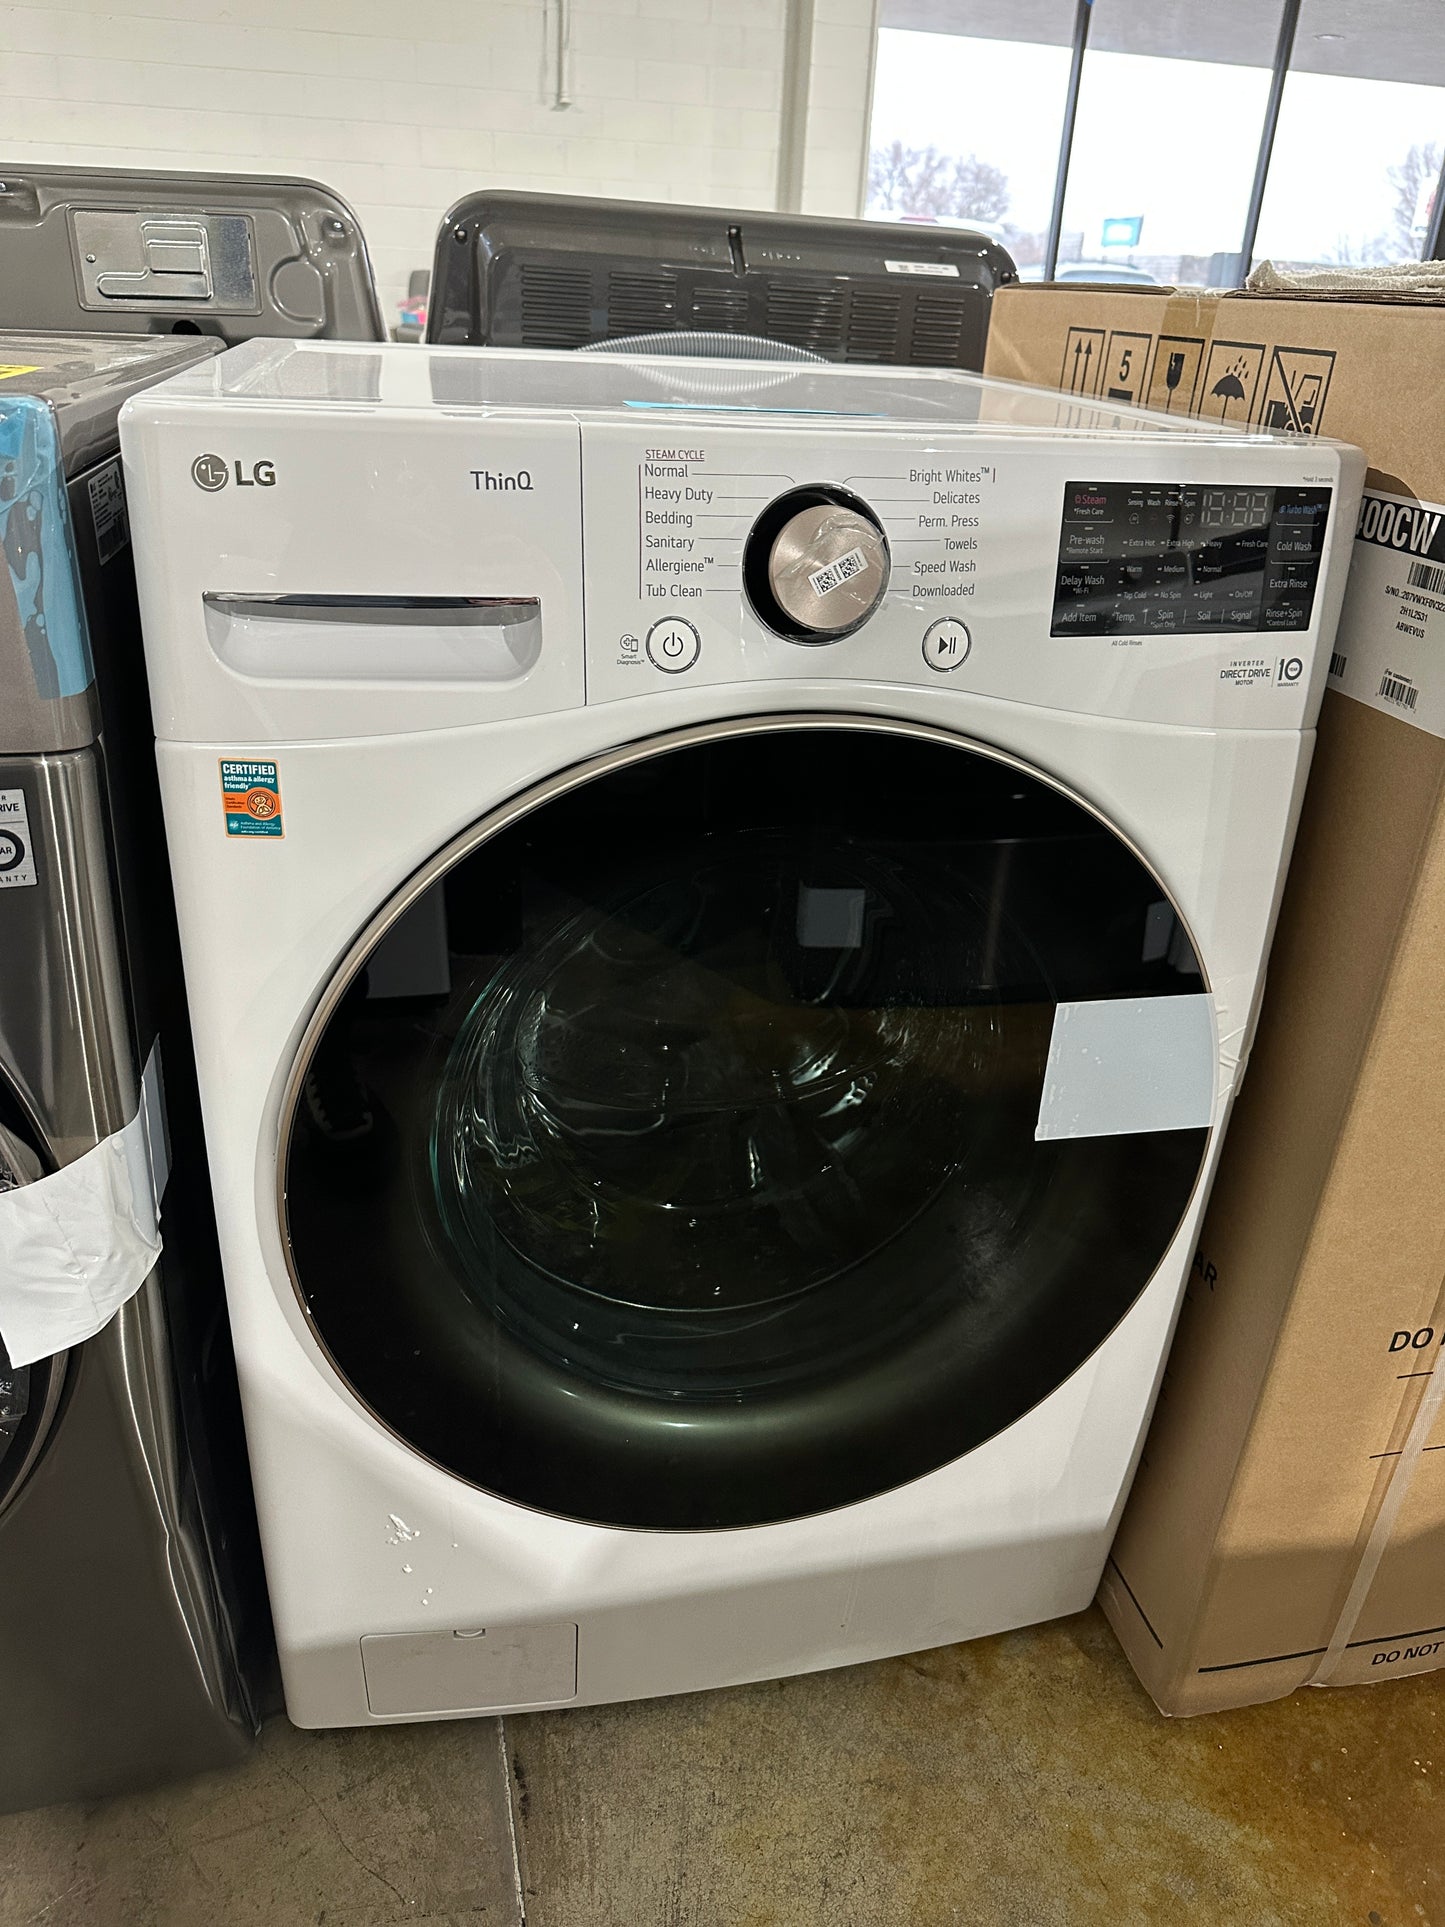 GORGEOUS FRONT LOAD LG WASHER - WAS11832S WM4000HWA